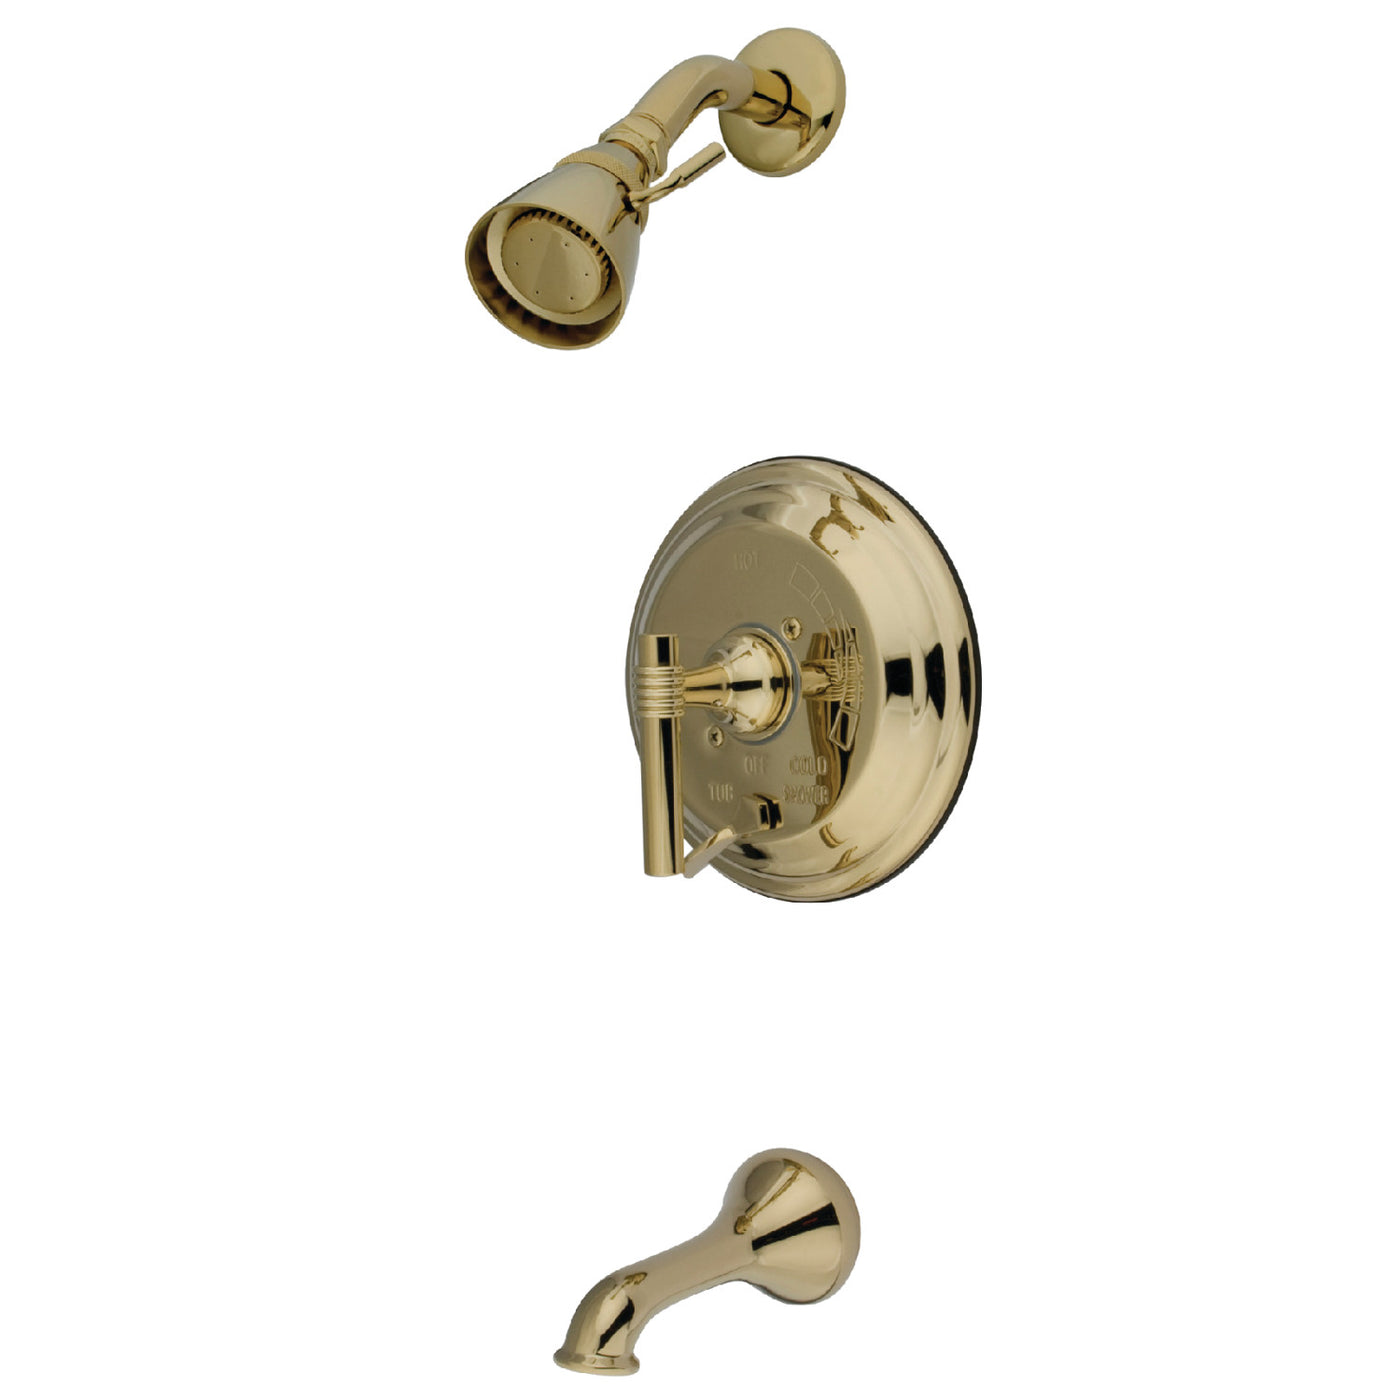 Elements of Design EB36320ML Tub and Shower Faucet with Diverter Valve and Ml Handle, Polished Brass